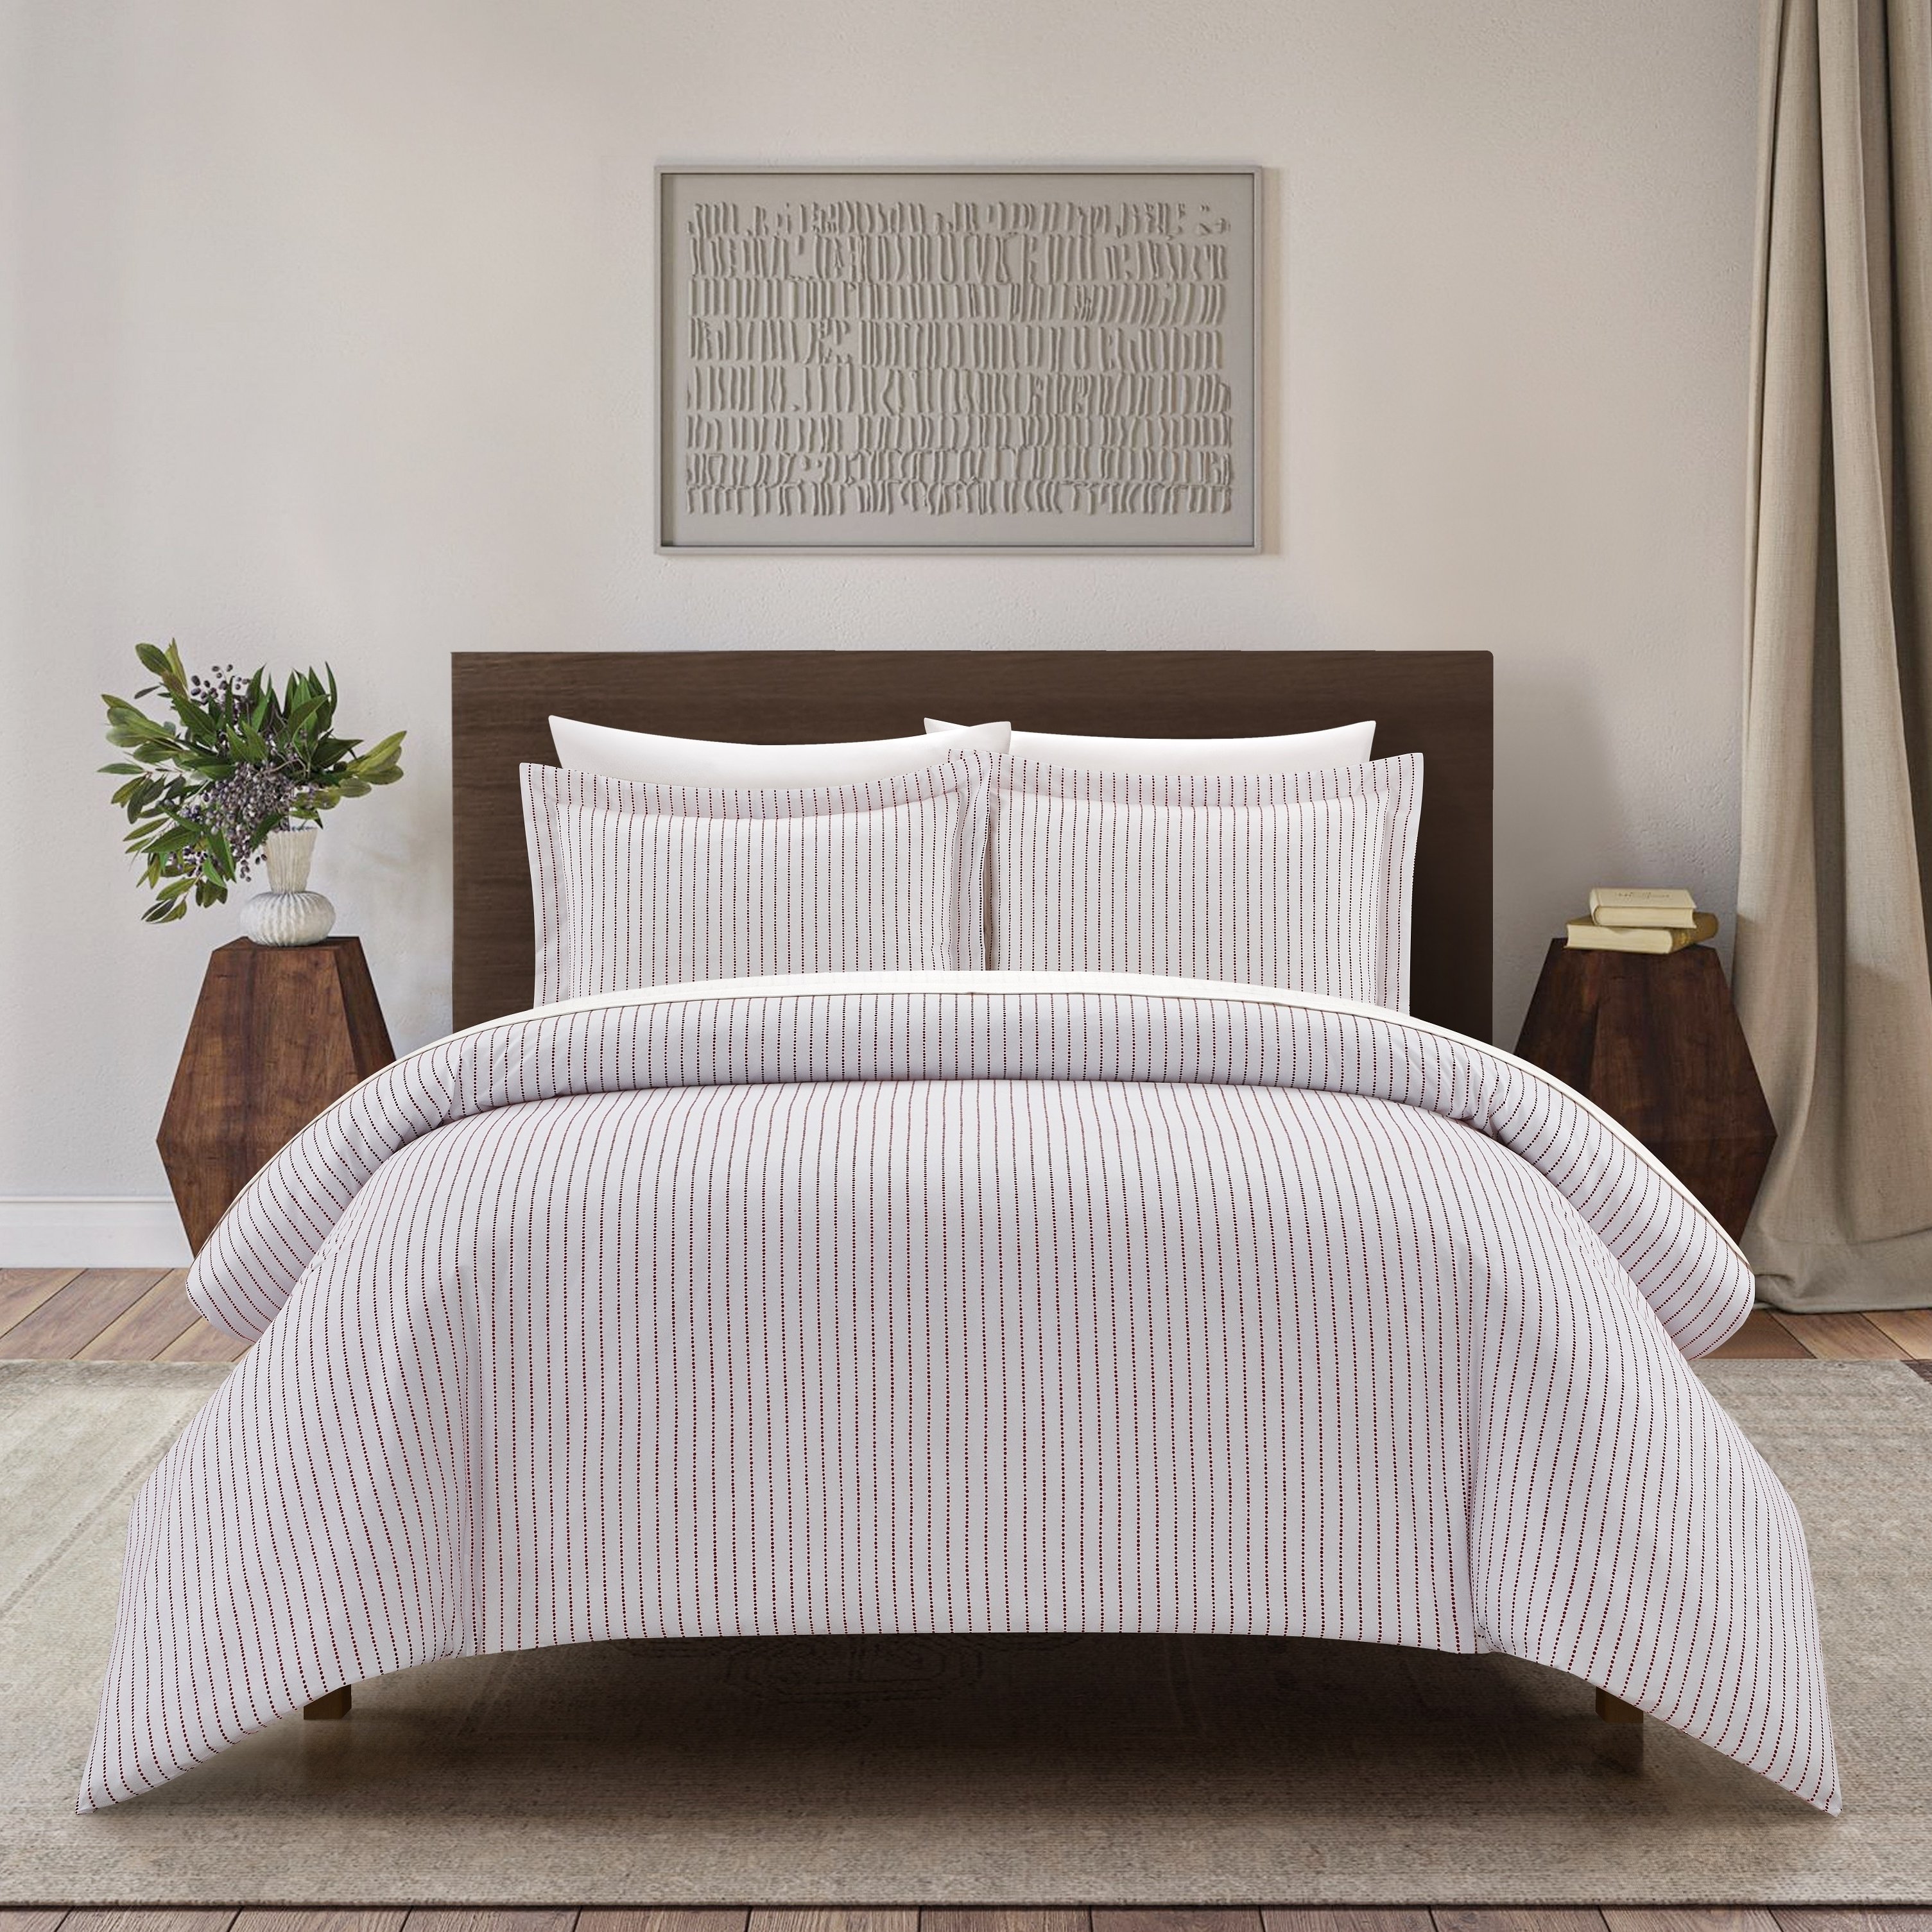 Vasey 2 Or 3 Piece Duvet Cover Set Contemporary Solid White With Dot Striped - Wine Red, Queen